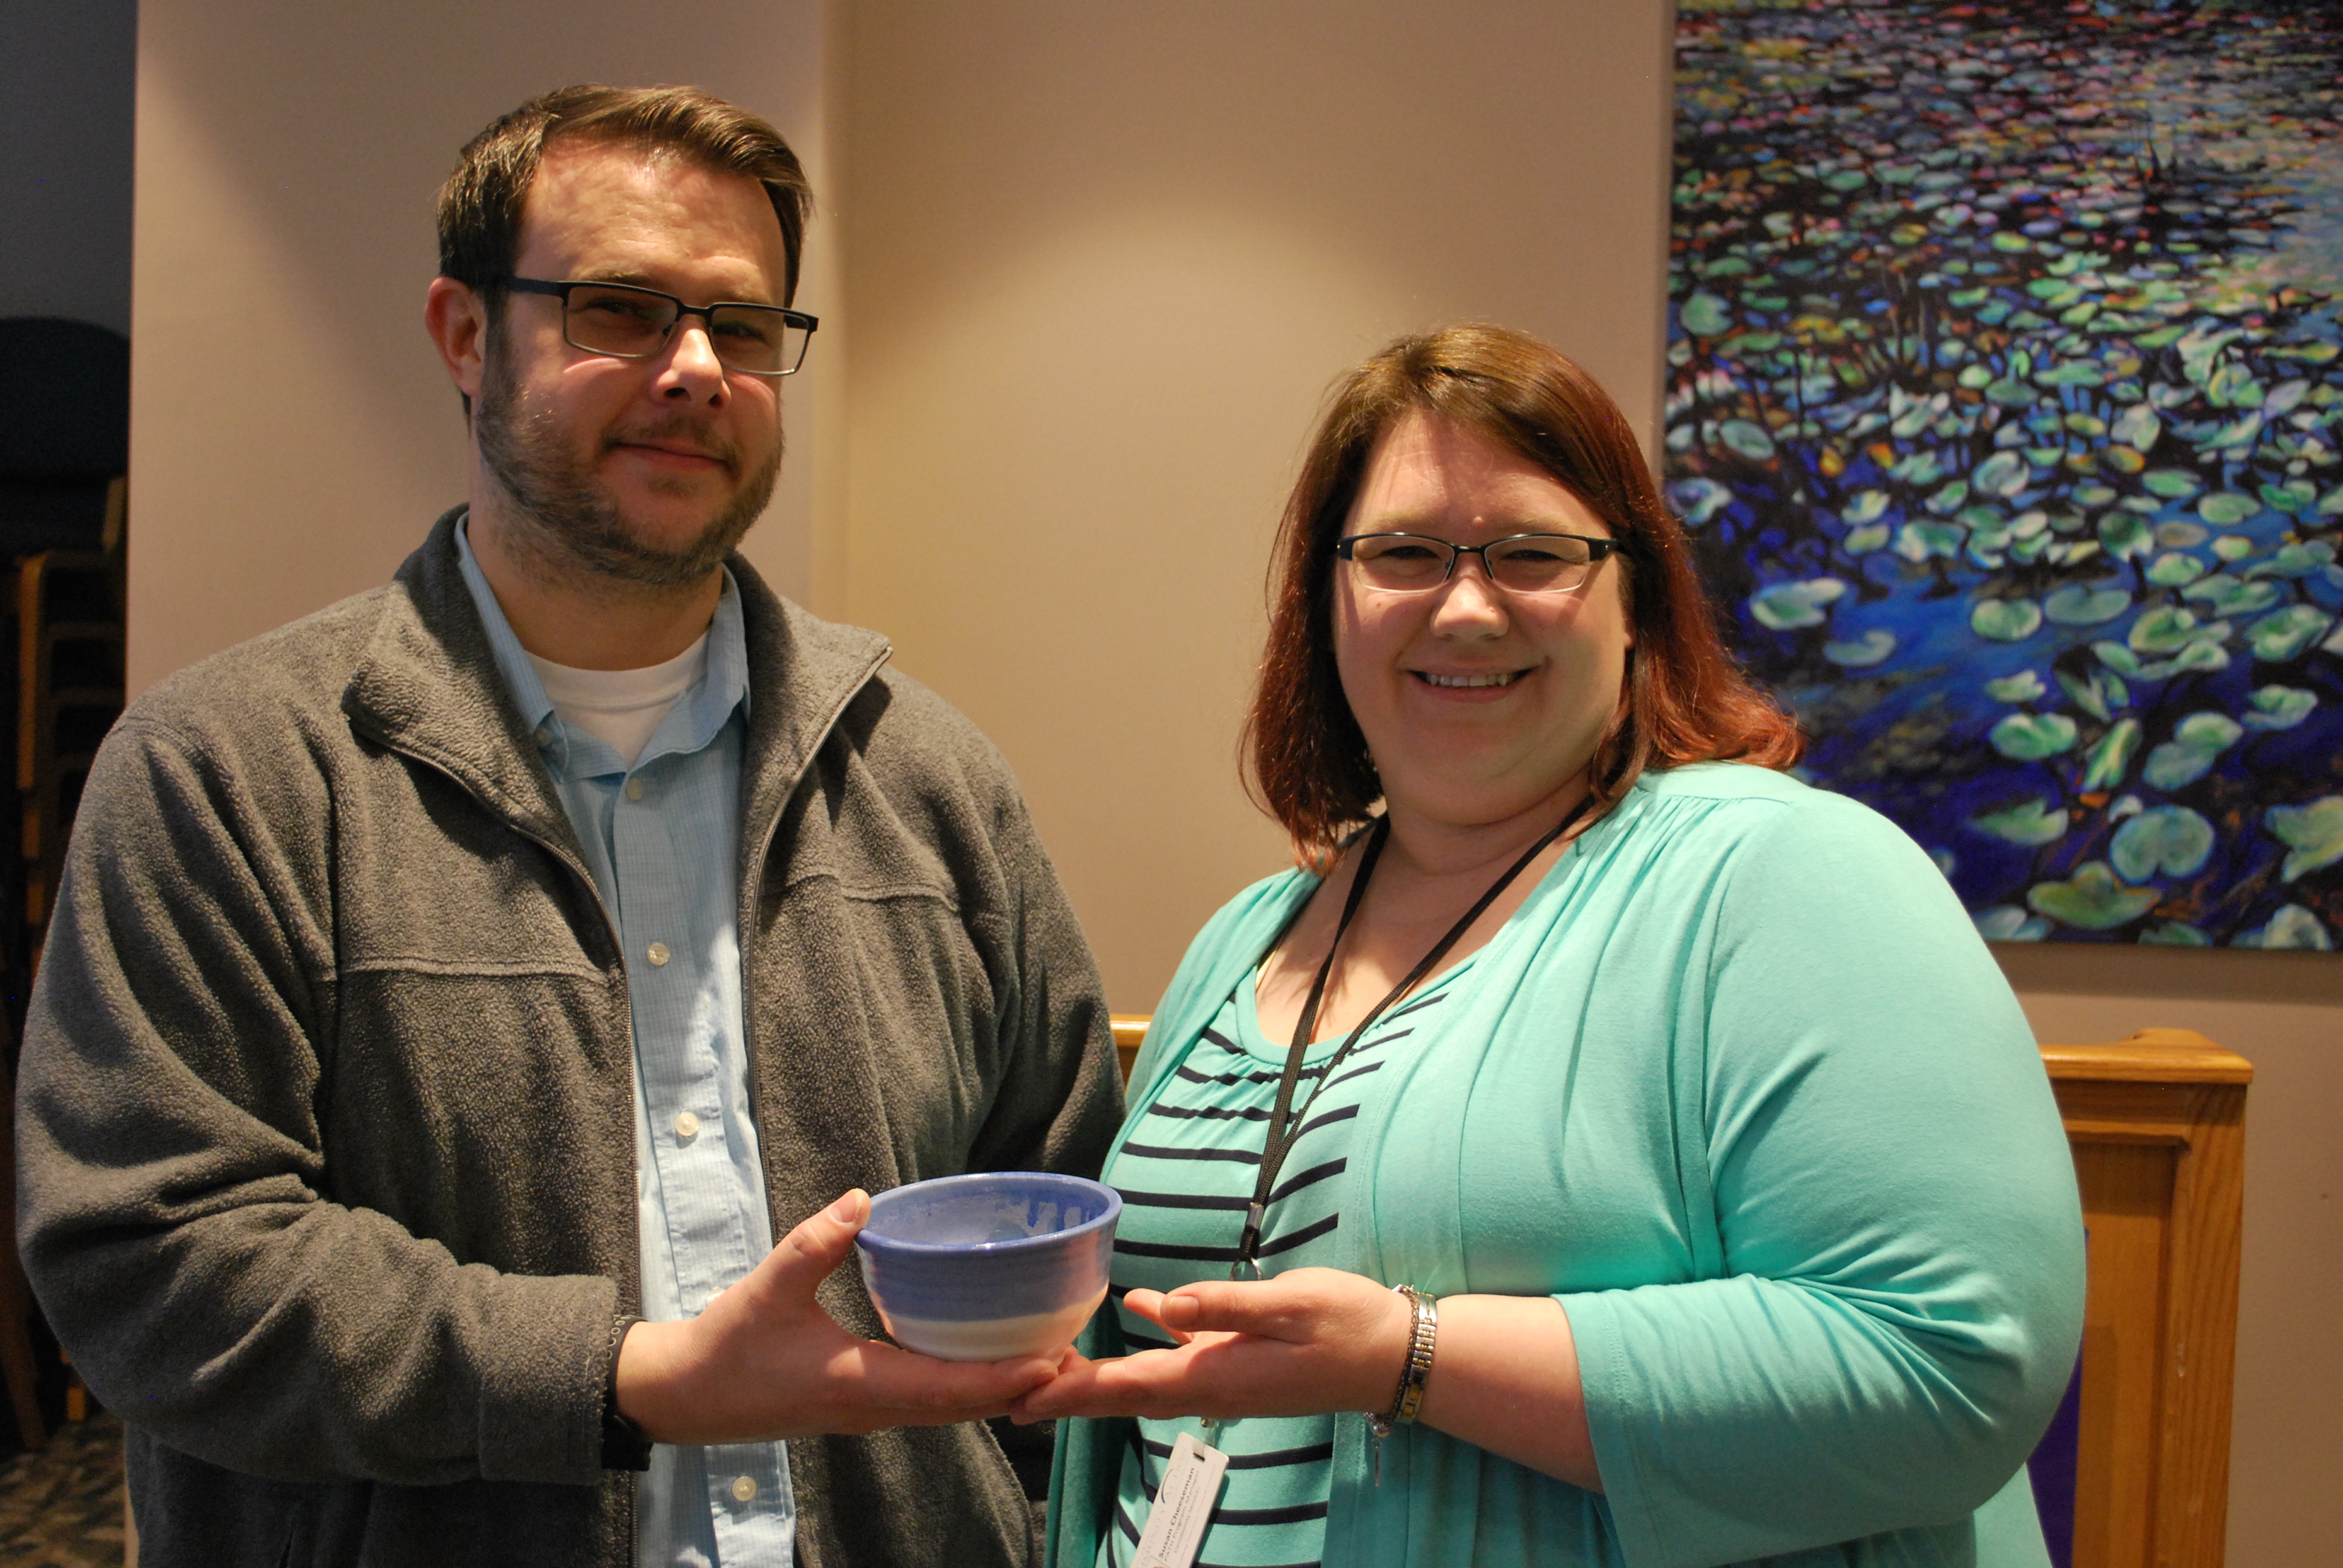 Kevin Kaplan and Susan Cheeseman with bowl from Empty Bowls event